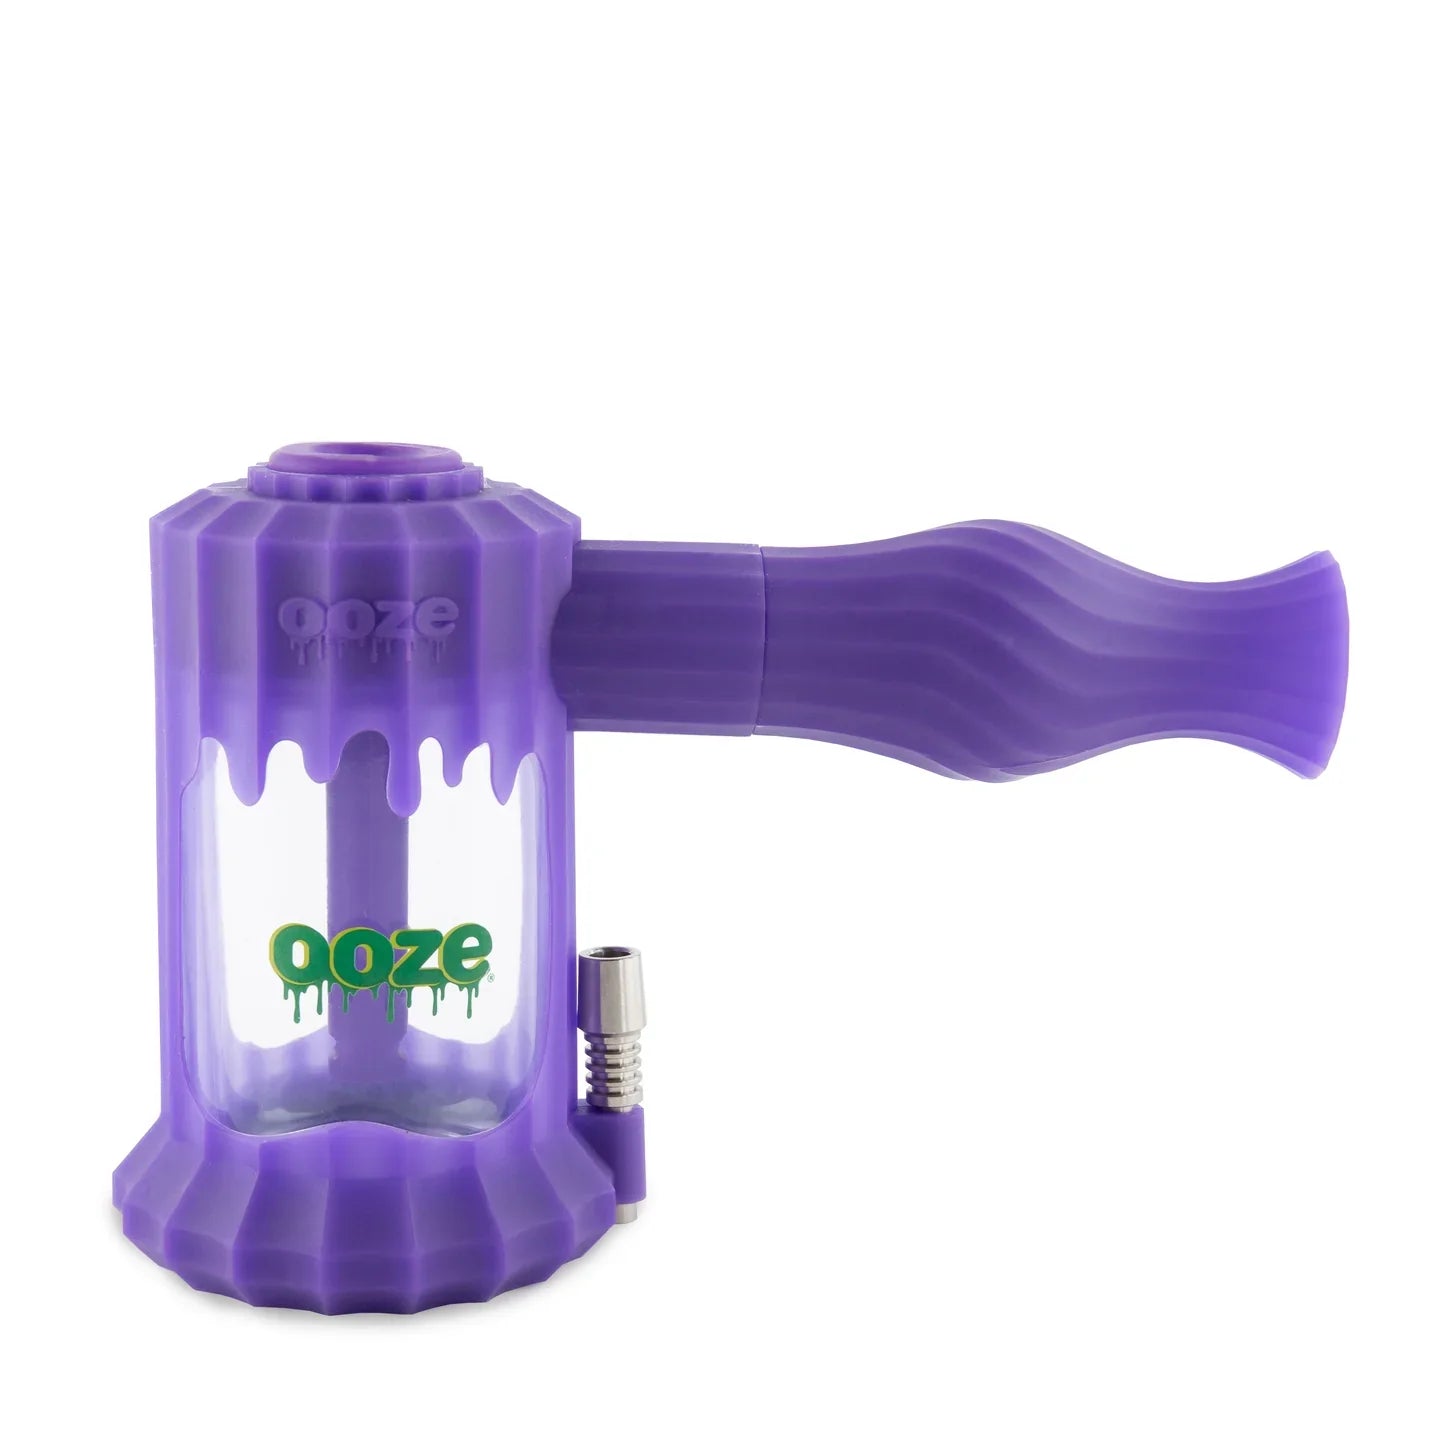 Ooze | Clobb – Silicone Glass 4-In-1 Hybrid_3